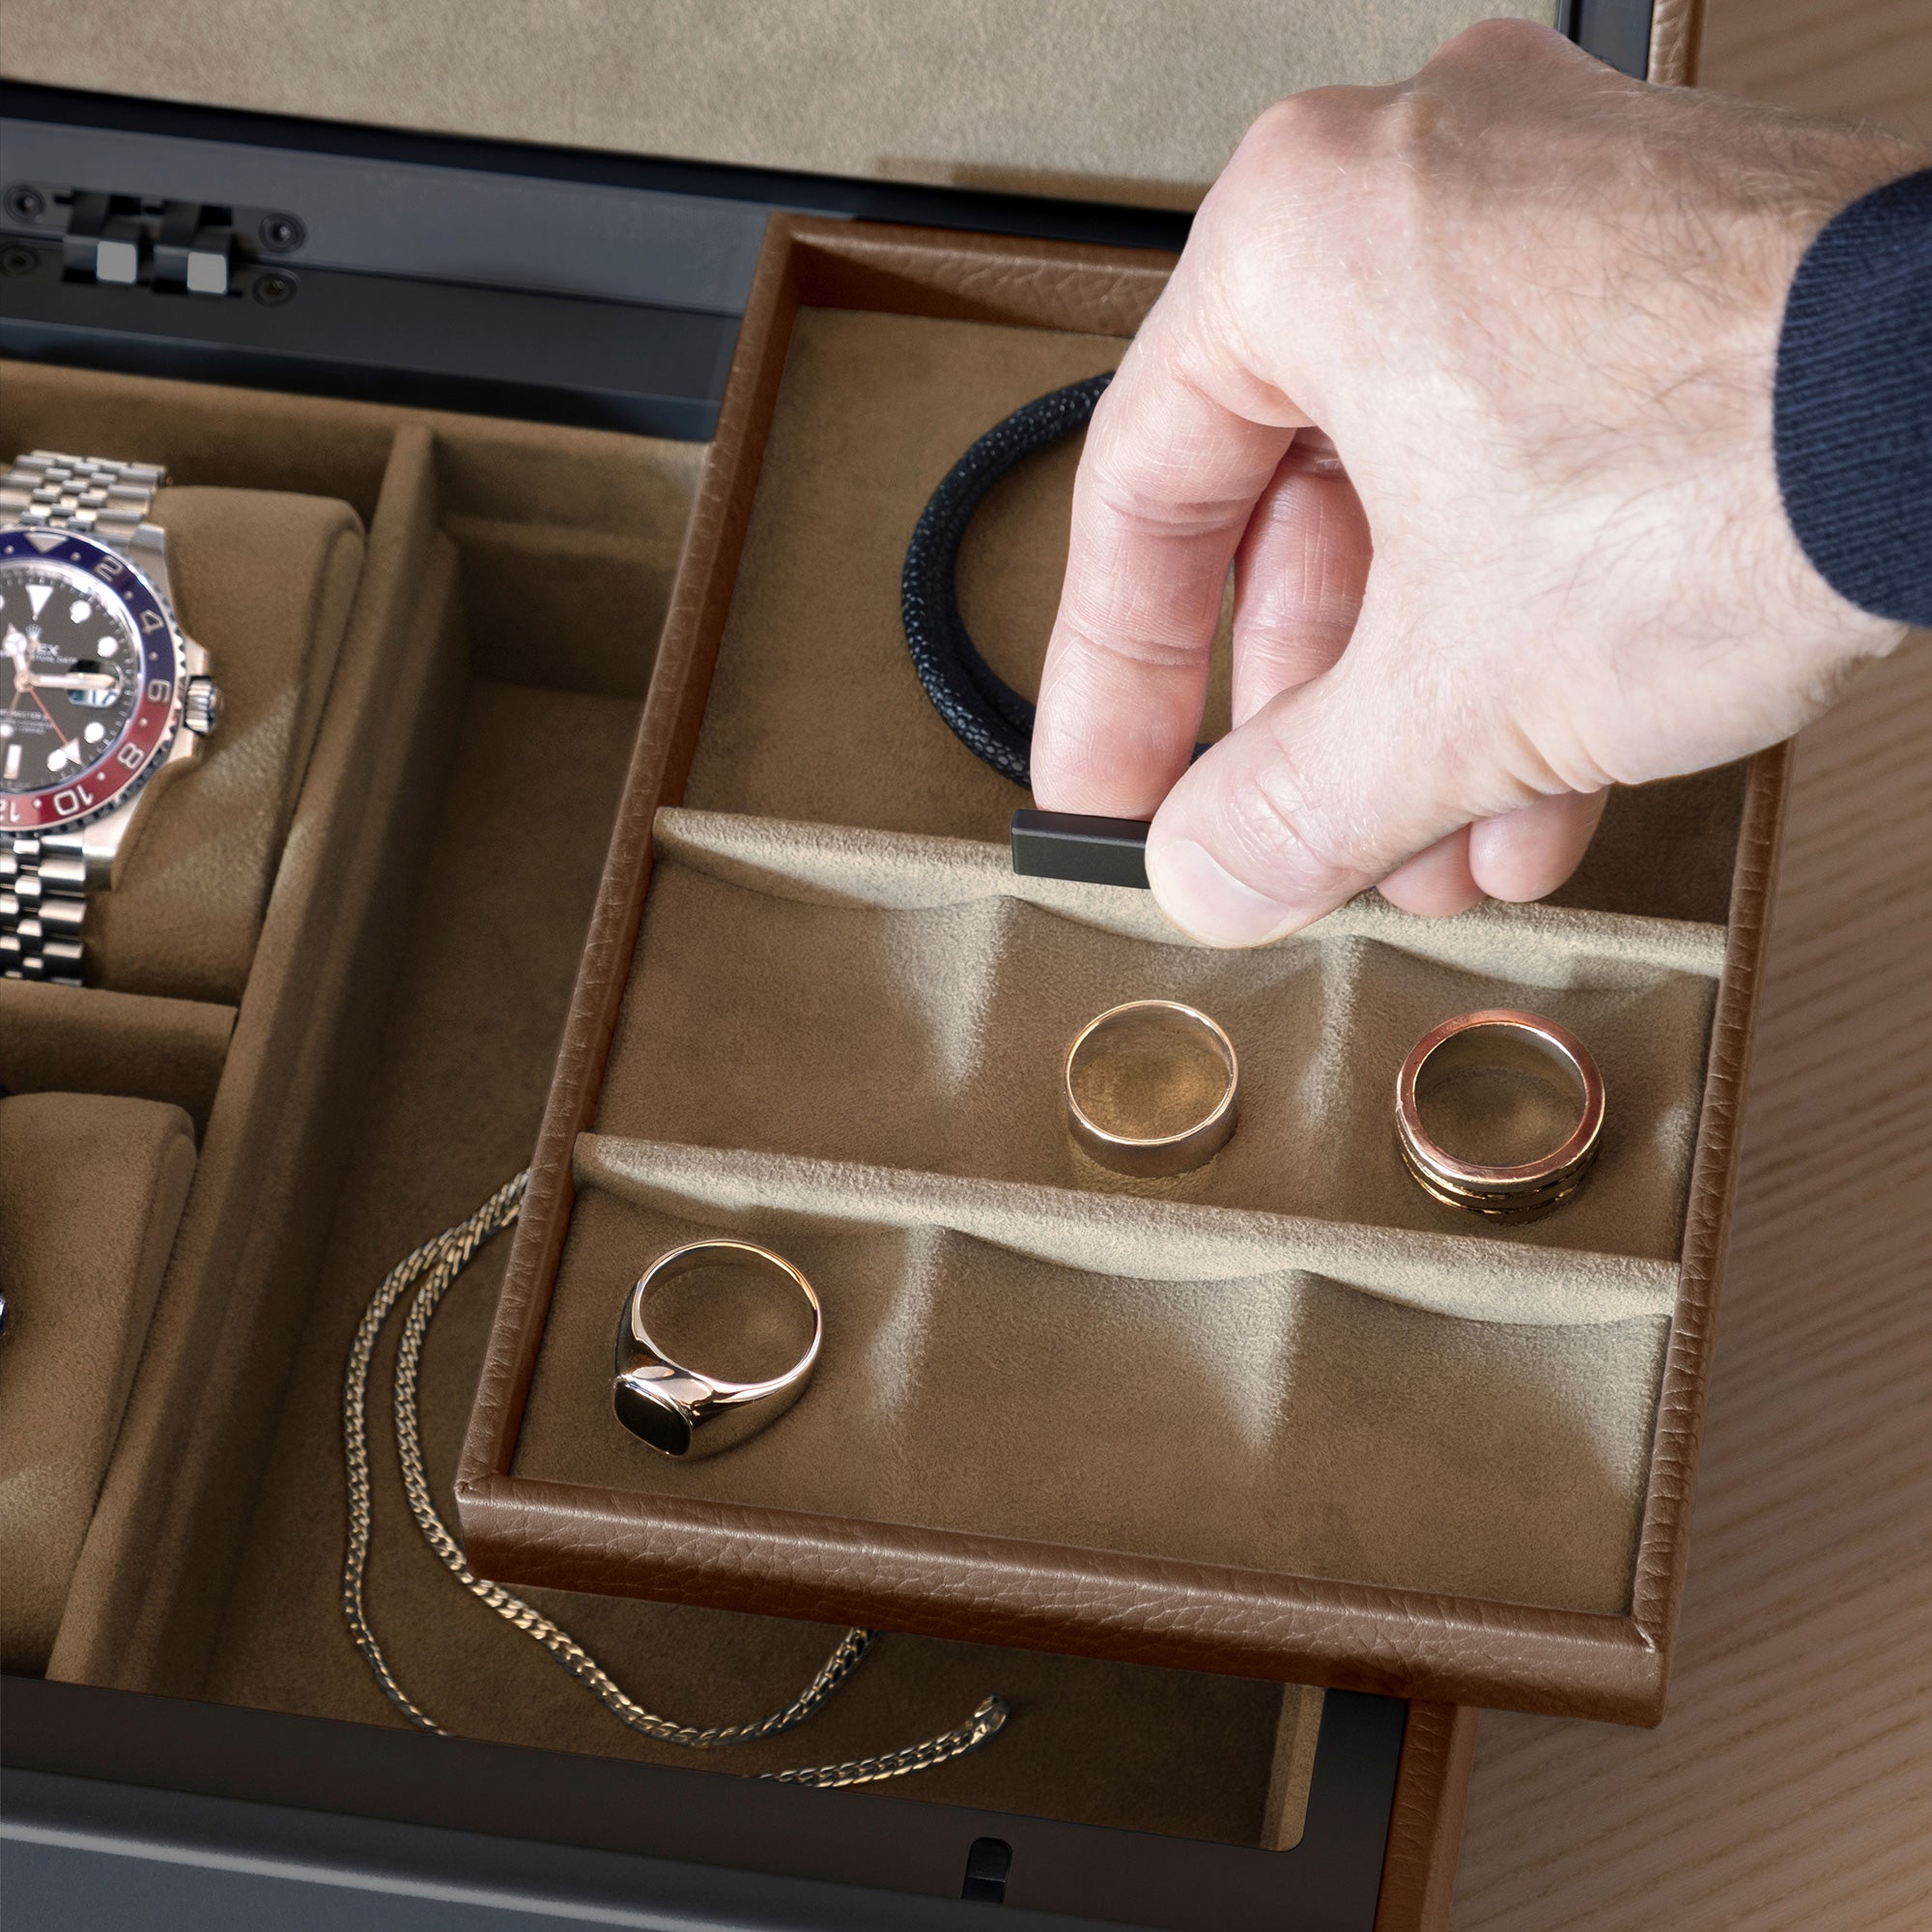 Detail photo of man lifting jewelry tray of the Taylor 2 Watch and Jewelry box in tan leather and camel interior. The Jewelry organizer is storing several rings, a necklace and a Rolex watch.